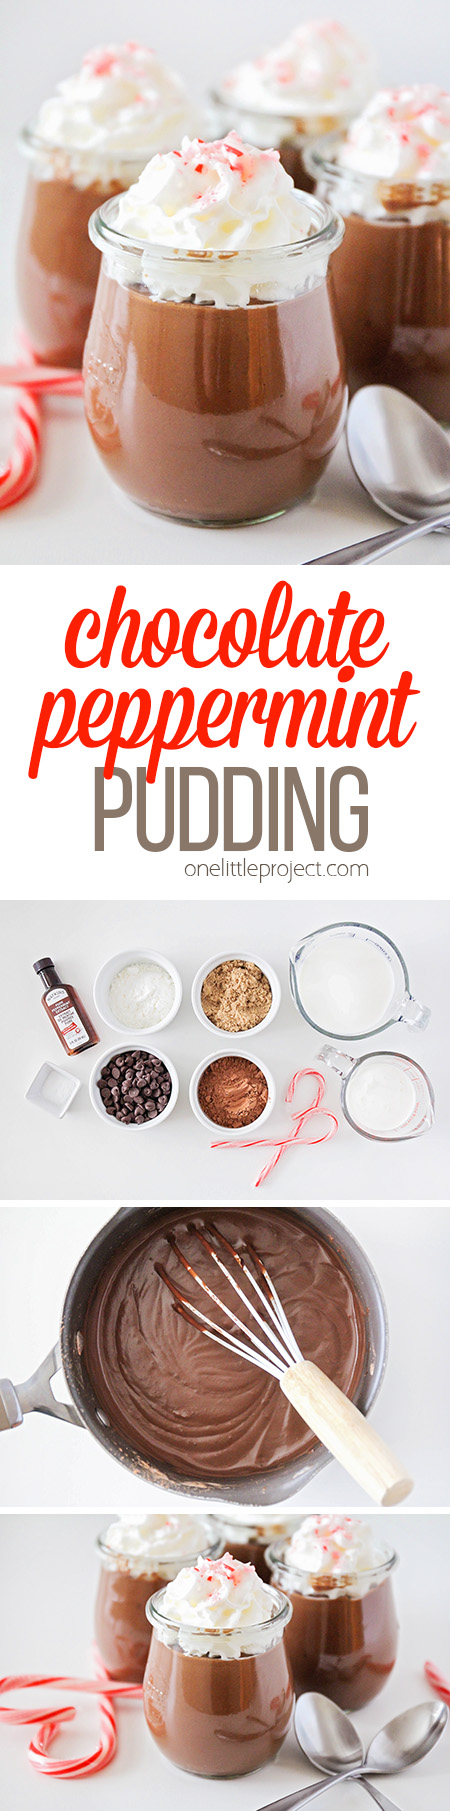 This luscious and rich chocolate peppermint pudding is the perfect festive treat for the holidays! It's easy to make on the stove top, and so delicious! 